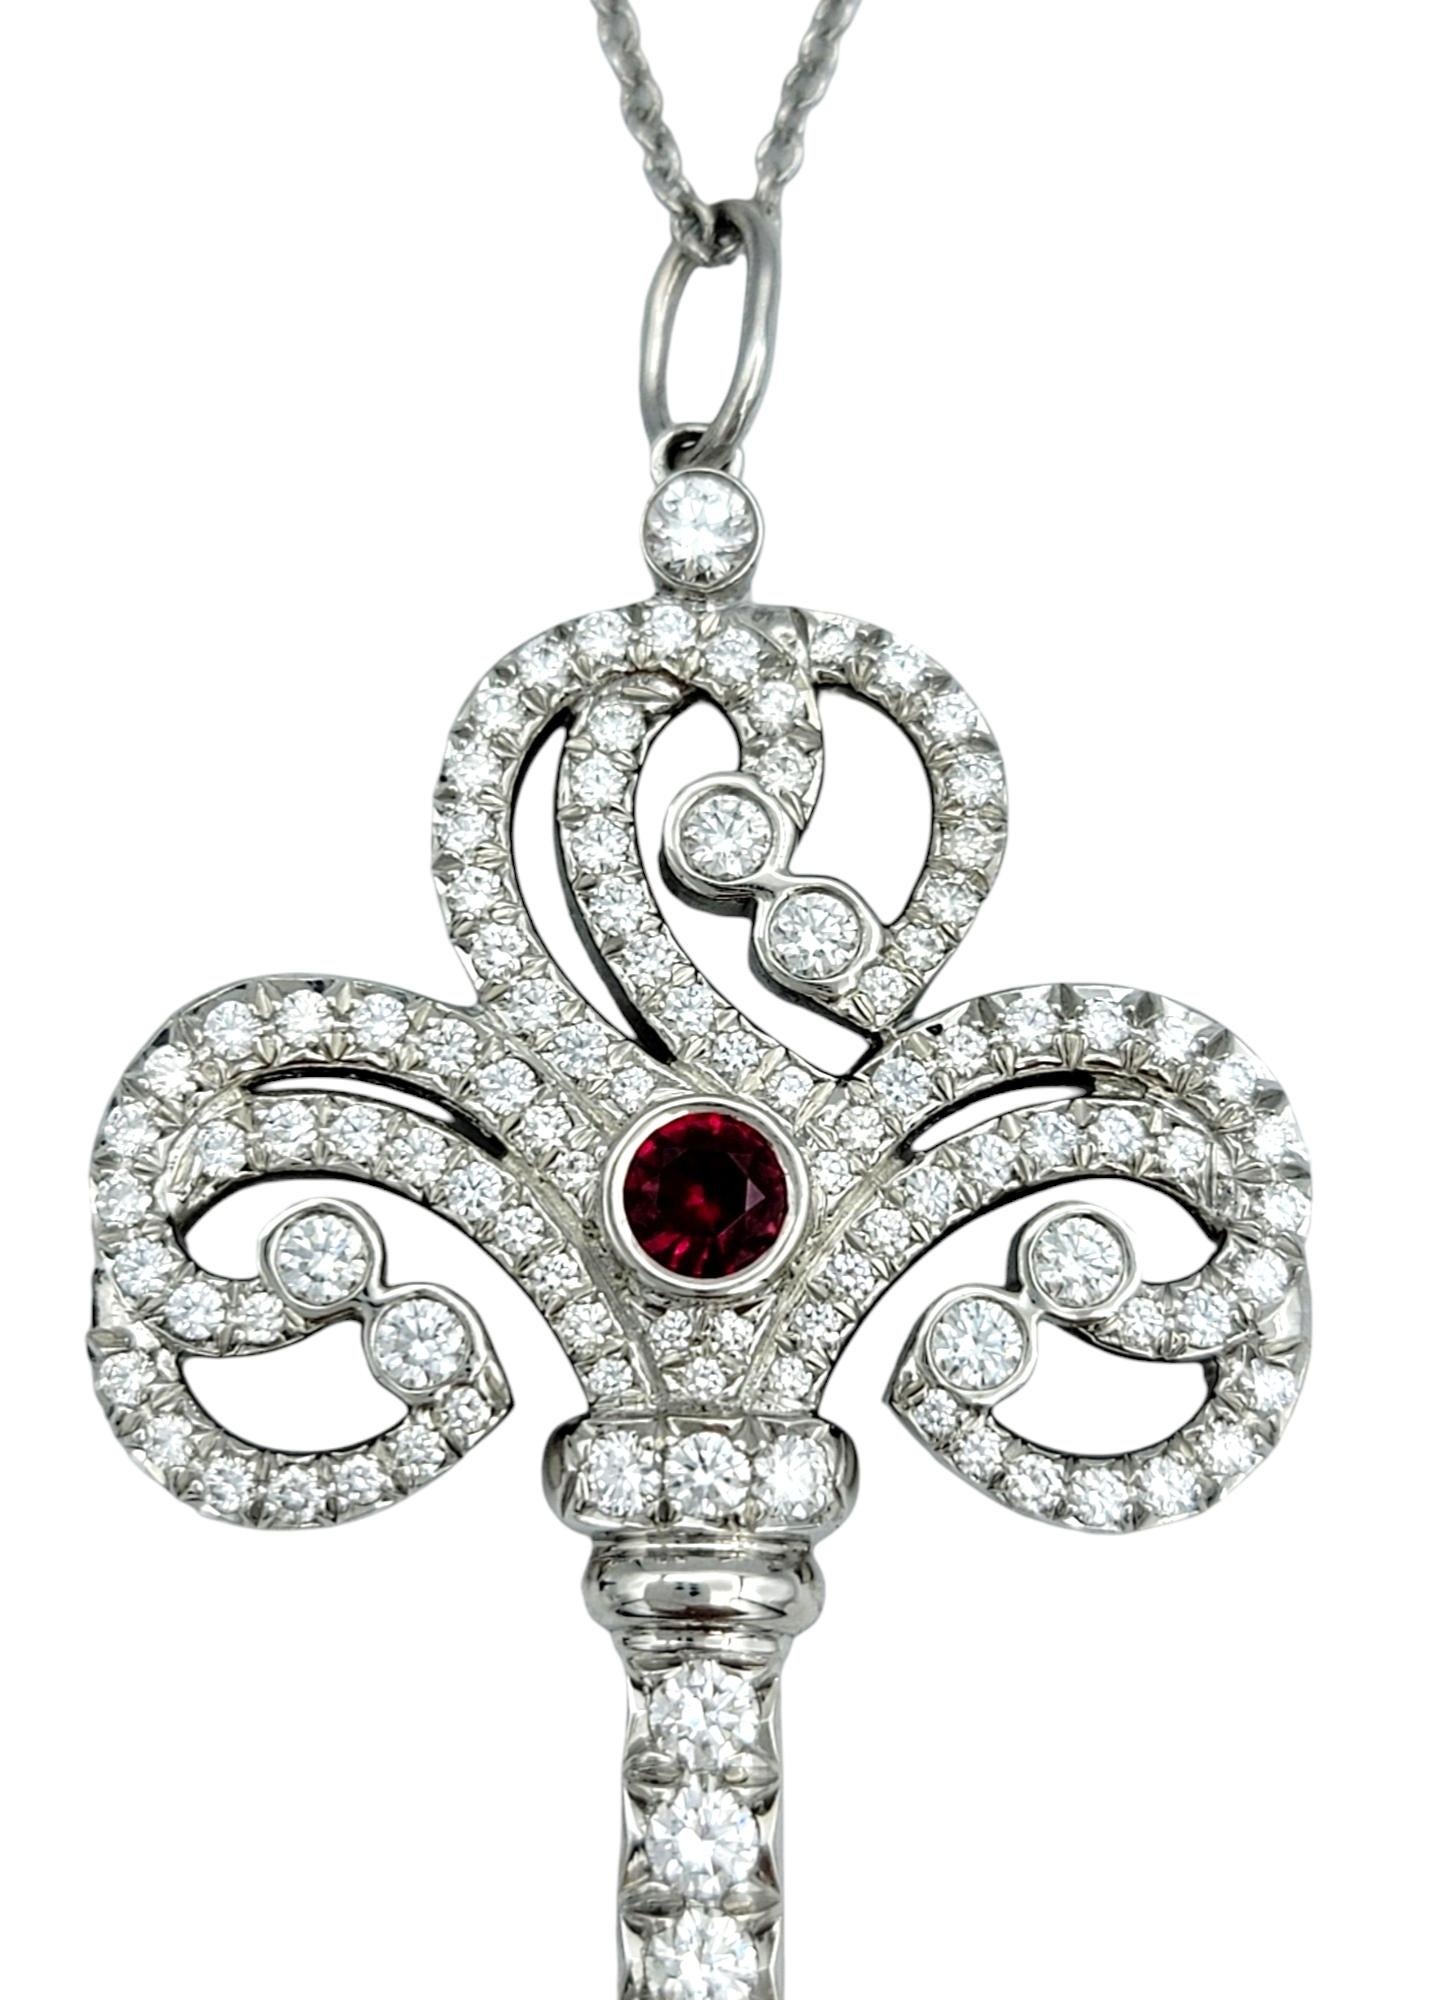 This stunning Tiffany & Co. diamond and ruby key pendant is an elegant work of art. Made from lustrous platinum, the key pendant exudes a sense of luxury. At the heart of the key is a gorgeous bezel set ruby surrounded by dazzling diamonds,